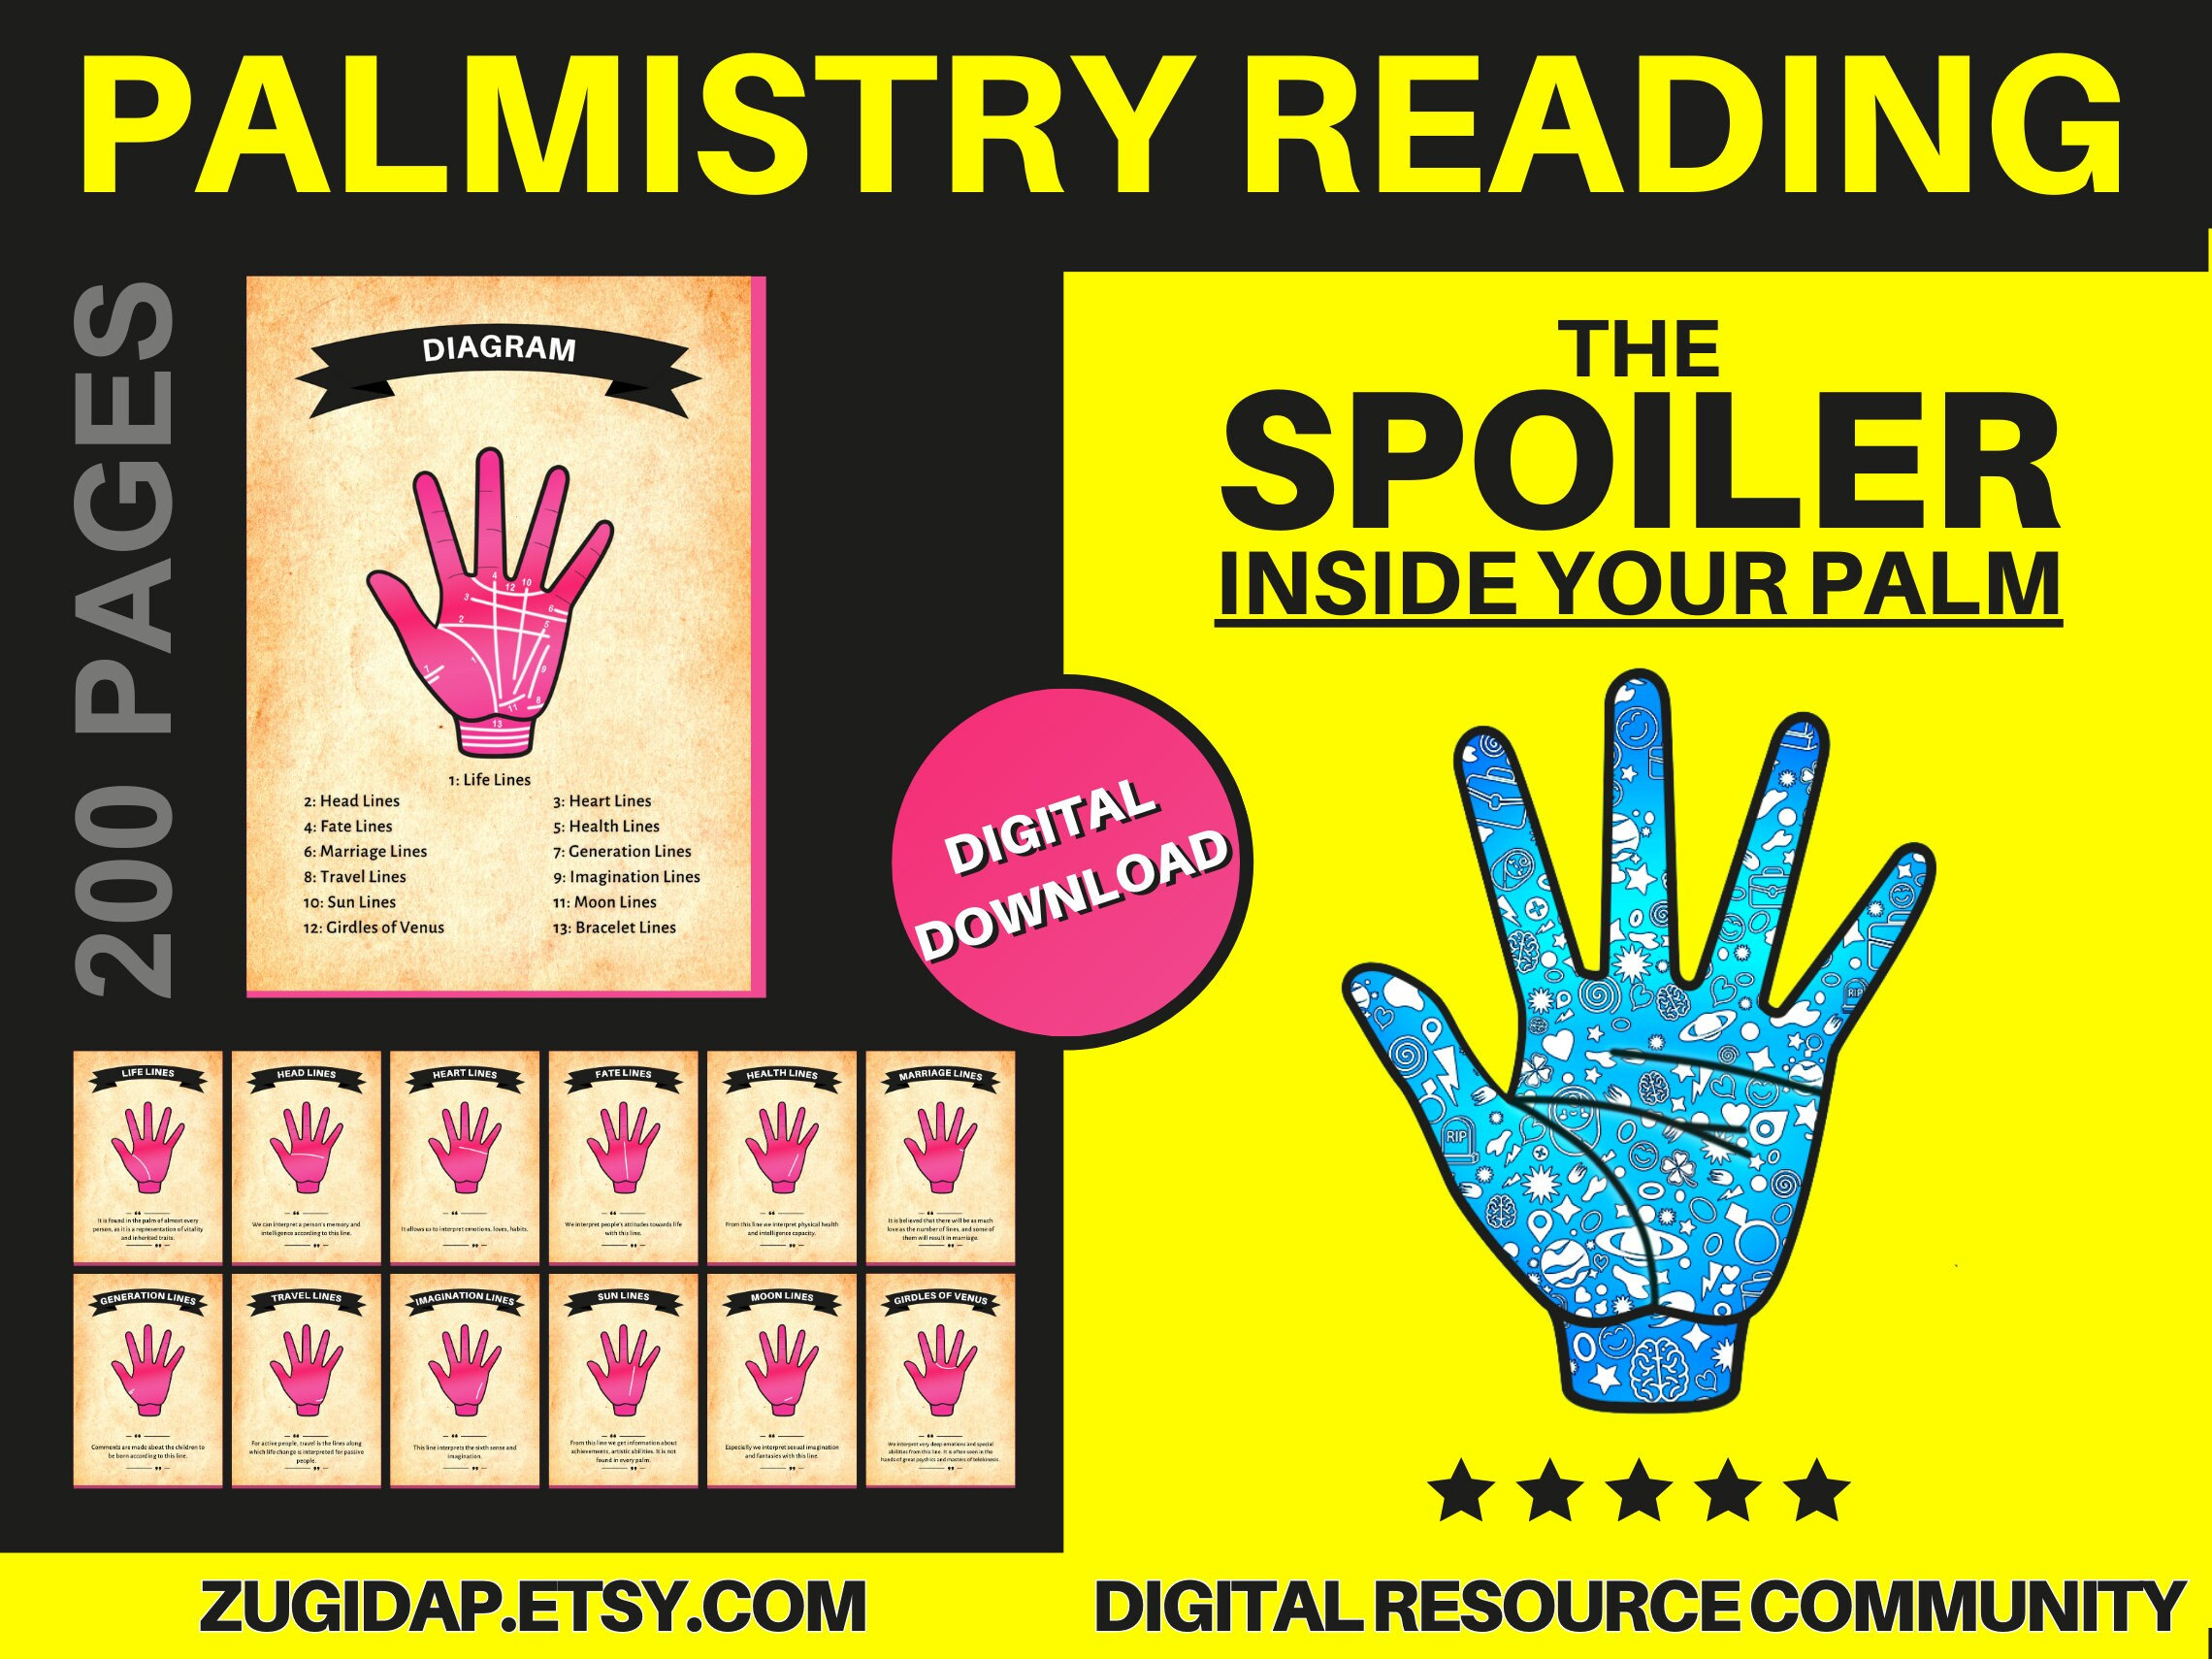 Palmistry for all, by Cheiro.